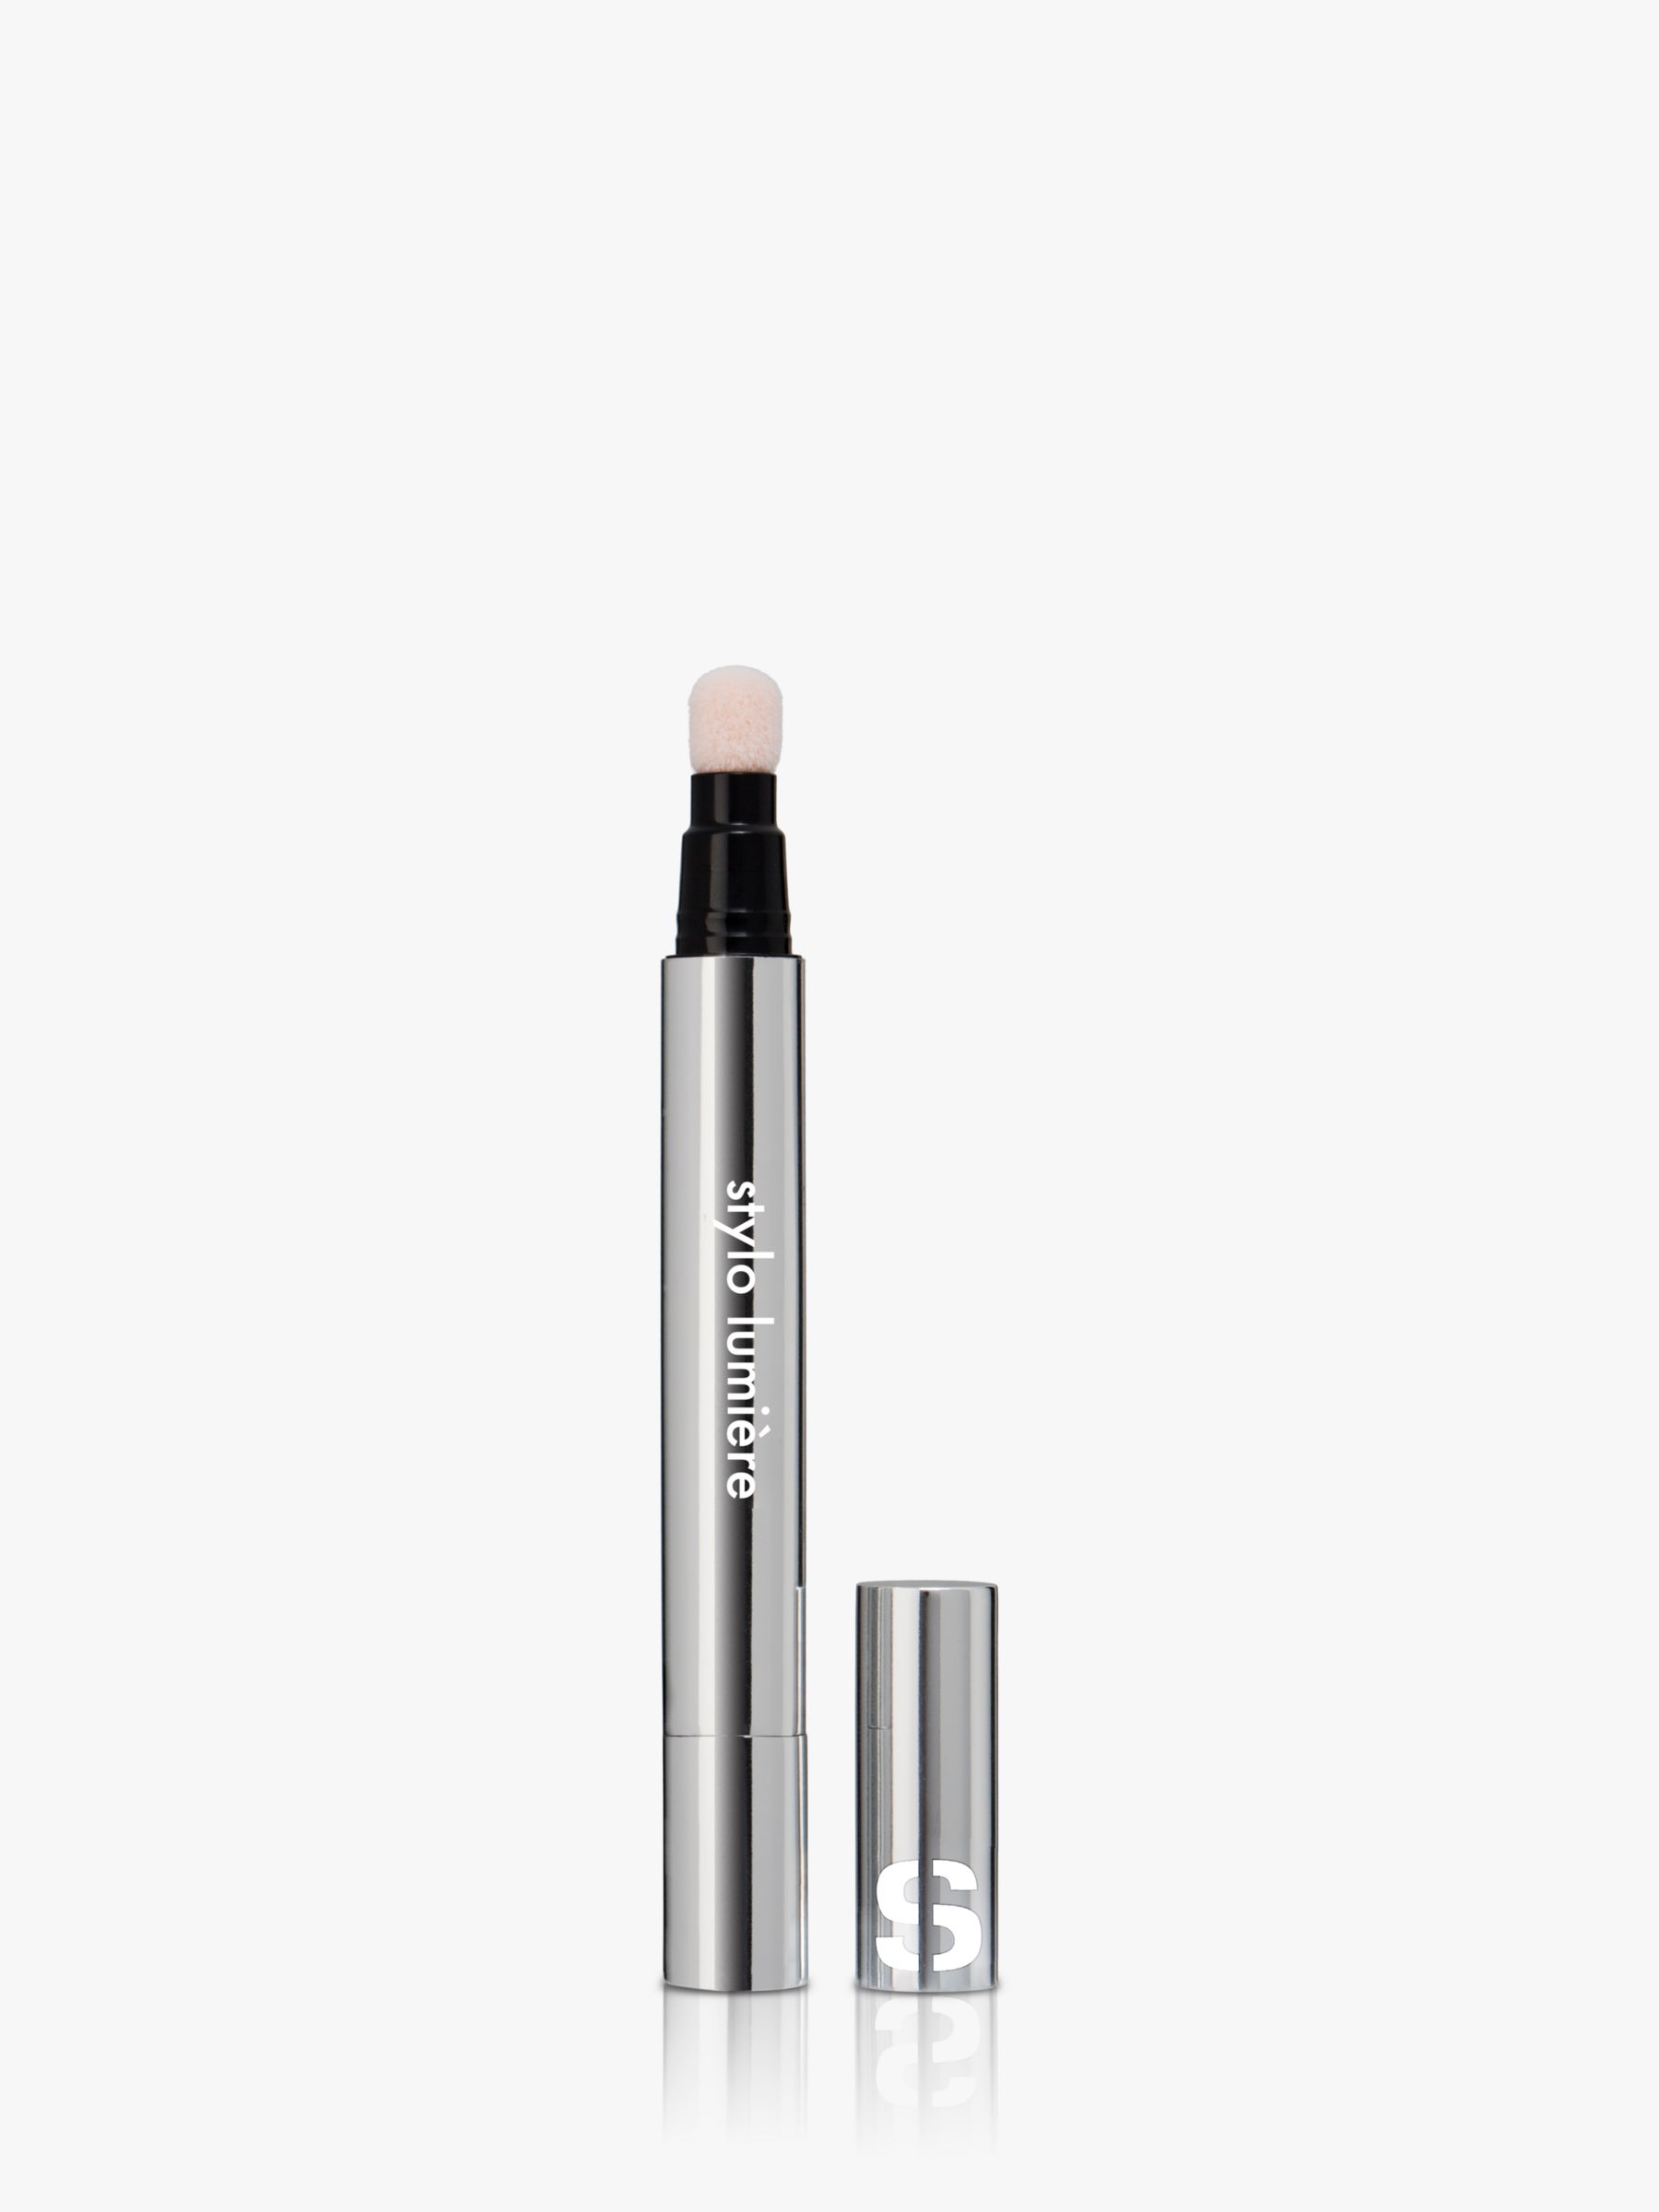 Sisley-Paris Stylo Lumière Concealer, 1 Pearly Rose 1